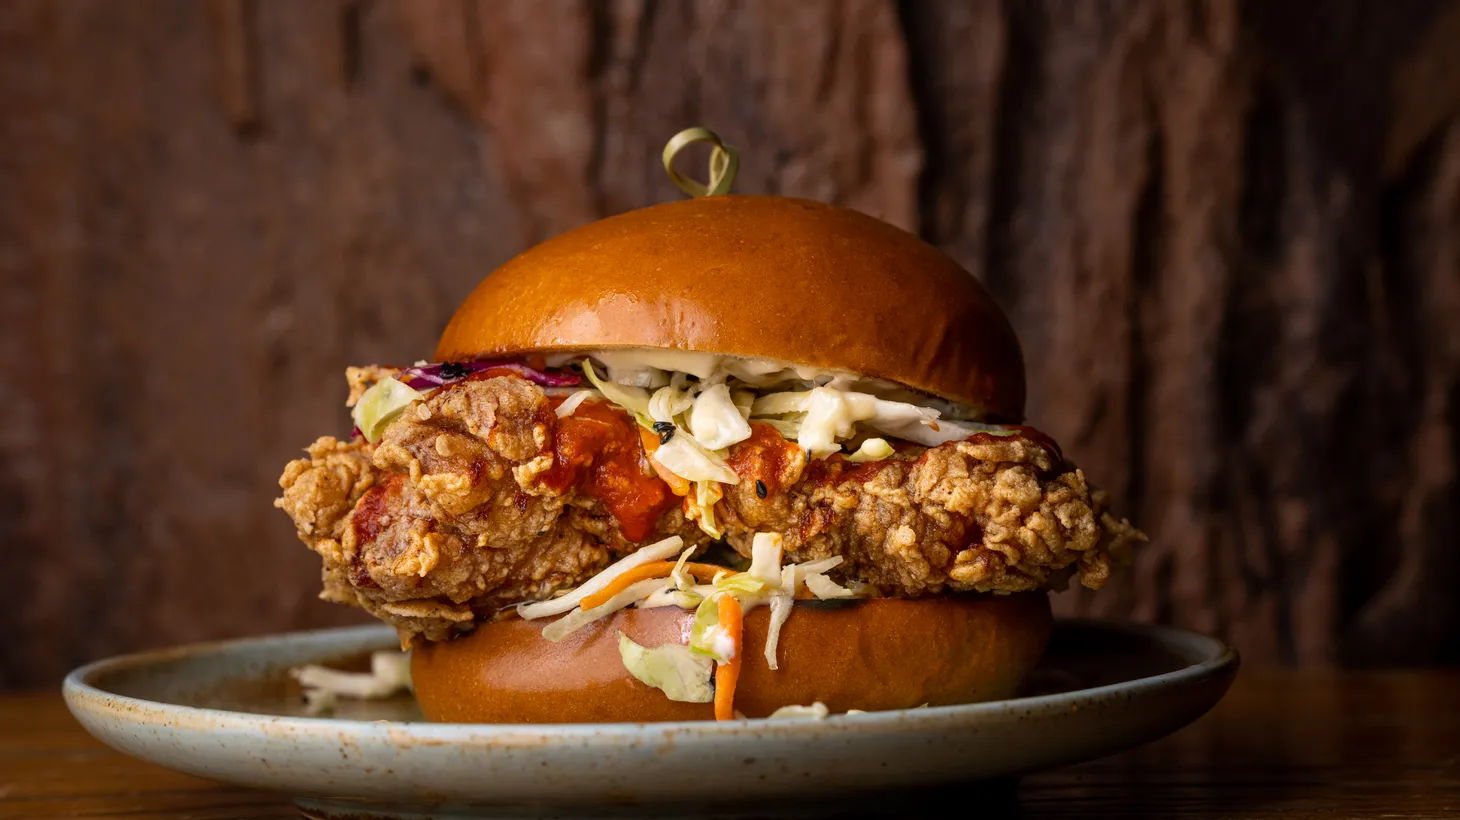 A fried chicken sandwich is featured on the menu at Mo's House of Axe.